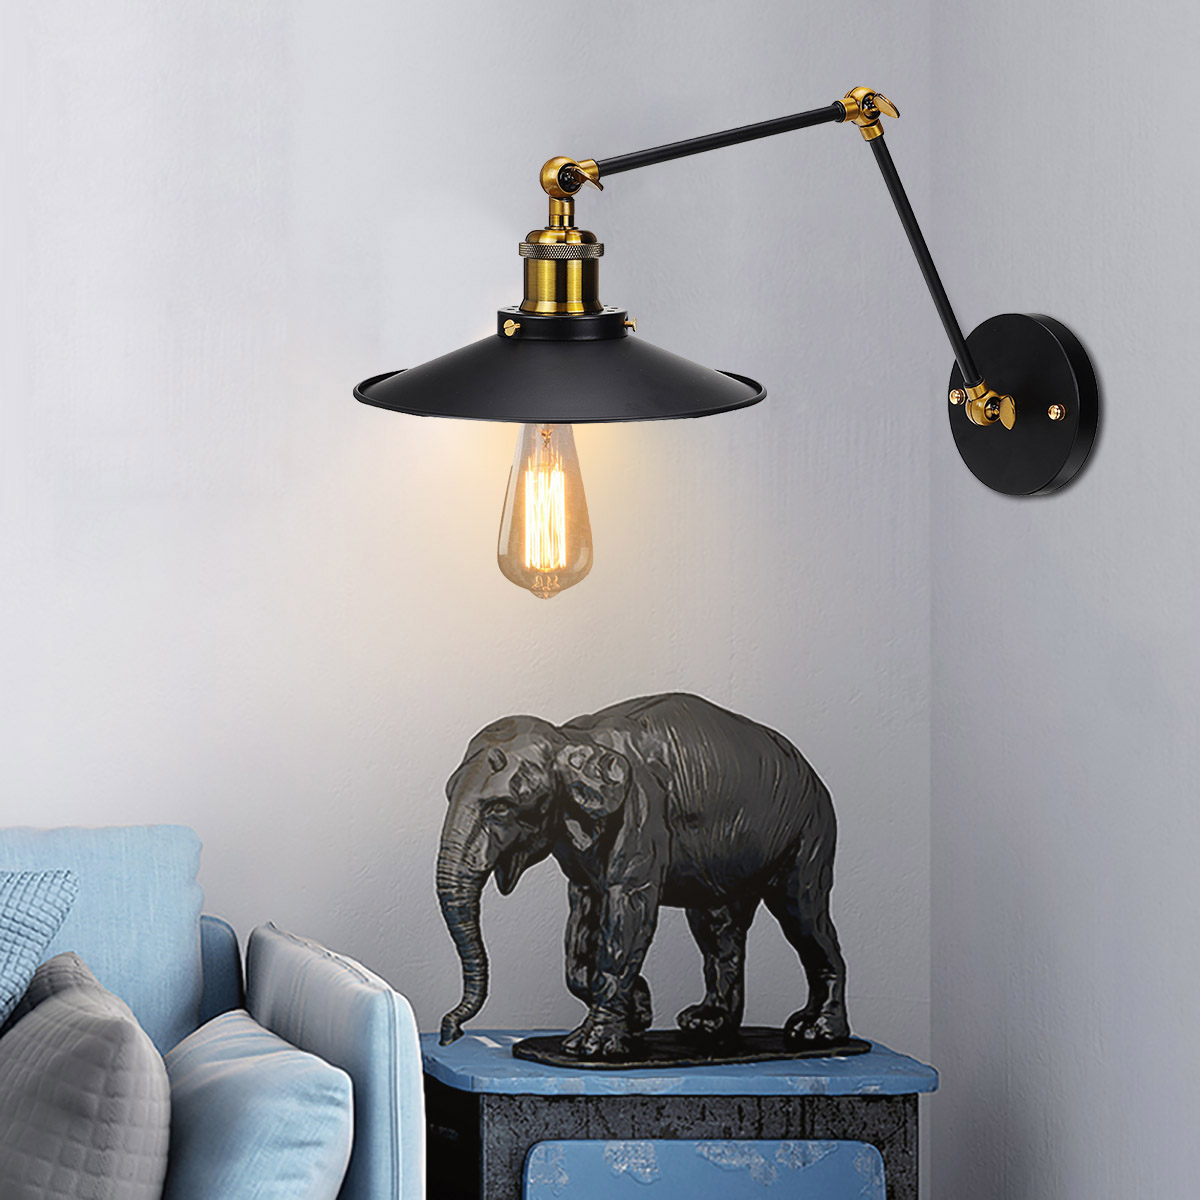 90-260V-LED-Wall-Lamp-Retro-Lamp-Industrial-Vintage-Bedside-Wall-Lamp-Iron-Loft-Without-Bulb-1797023-4